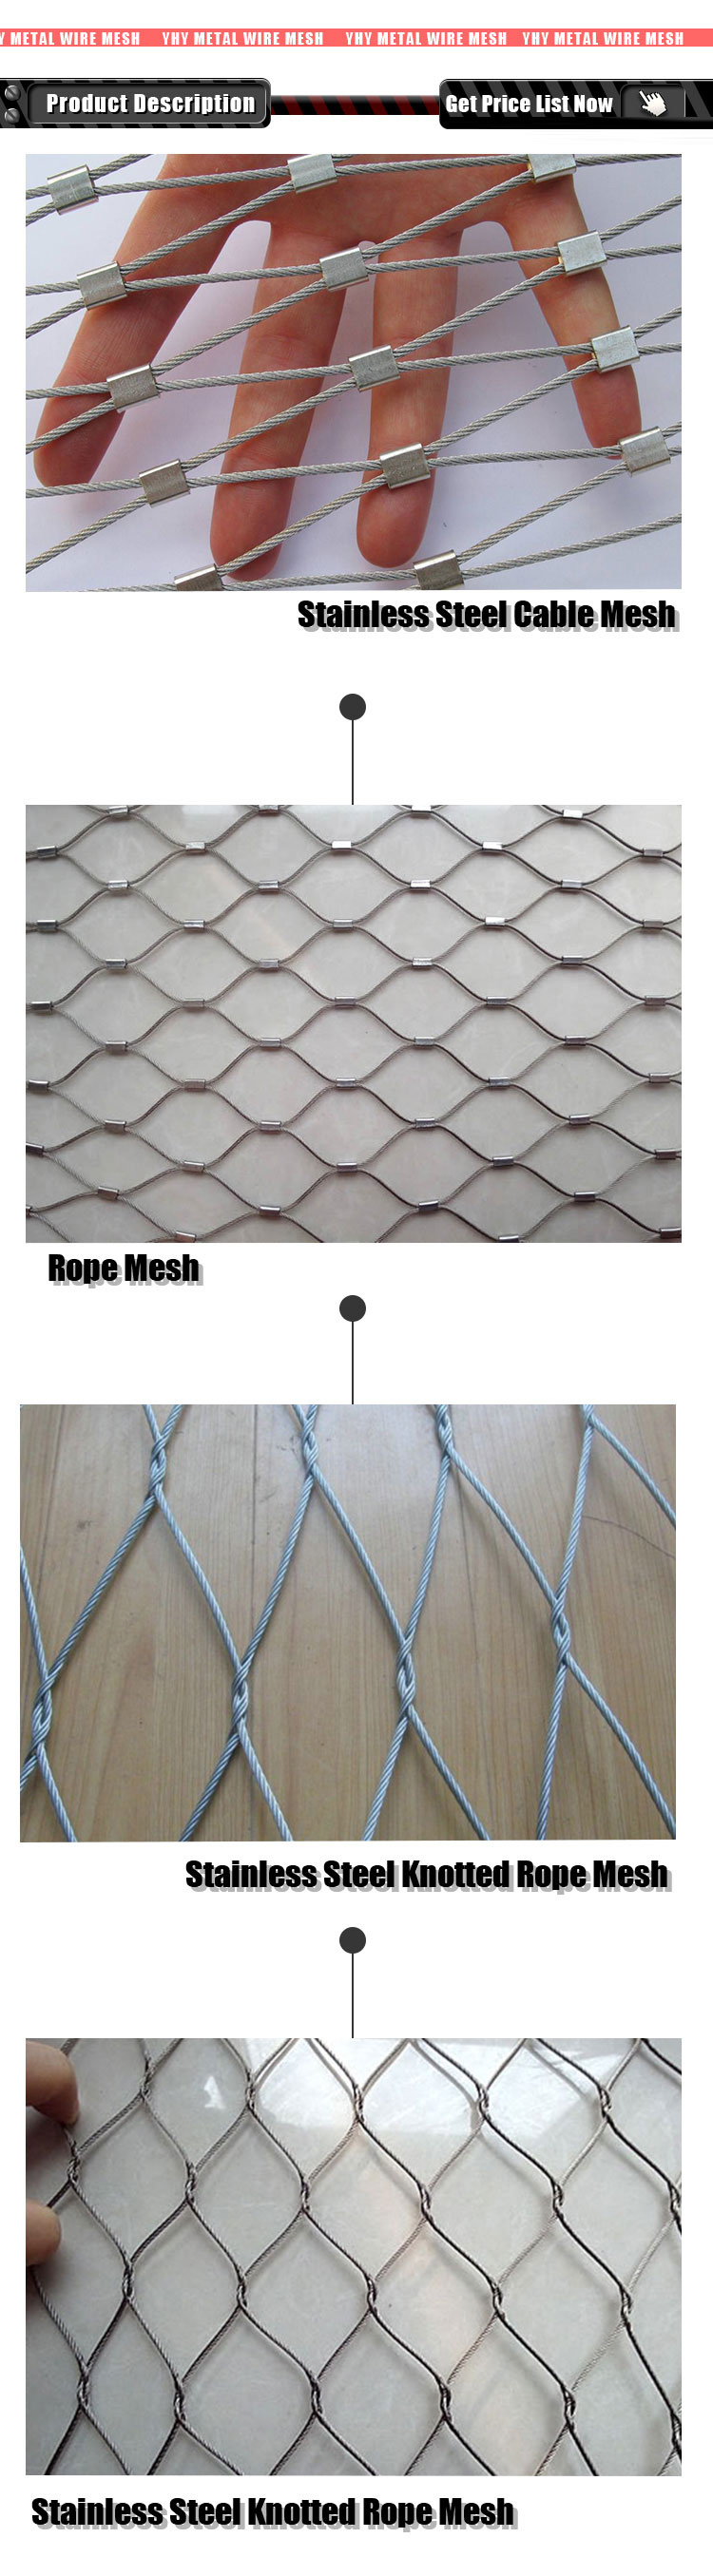 Stainless Steel Hand Woven Rope Mesh